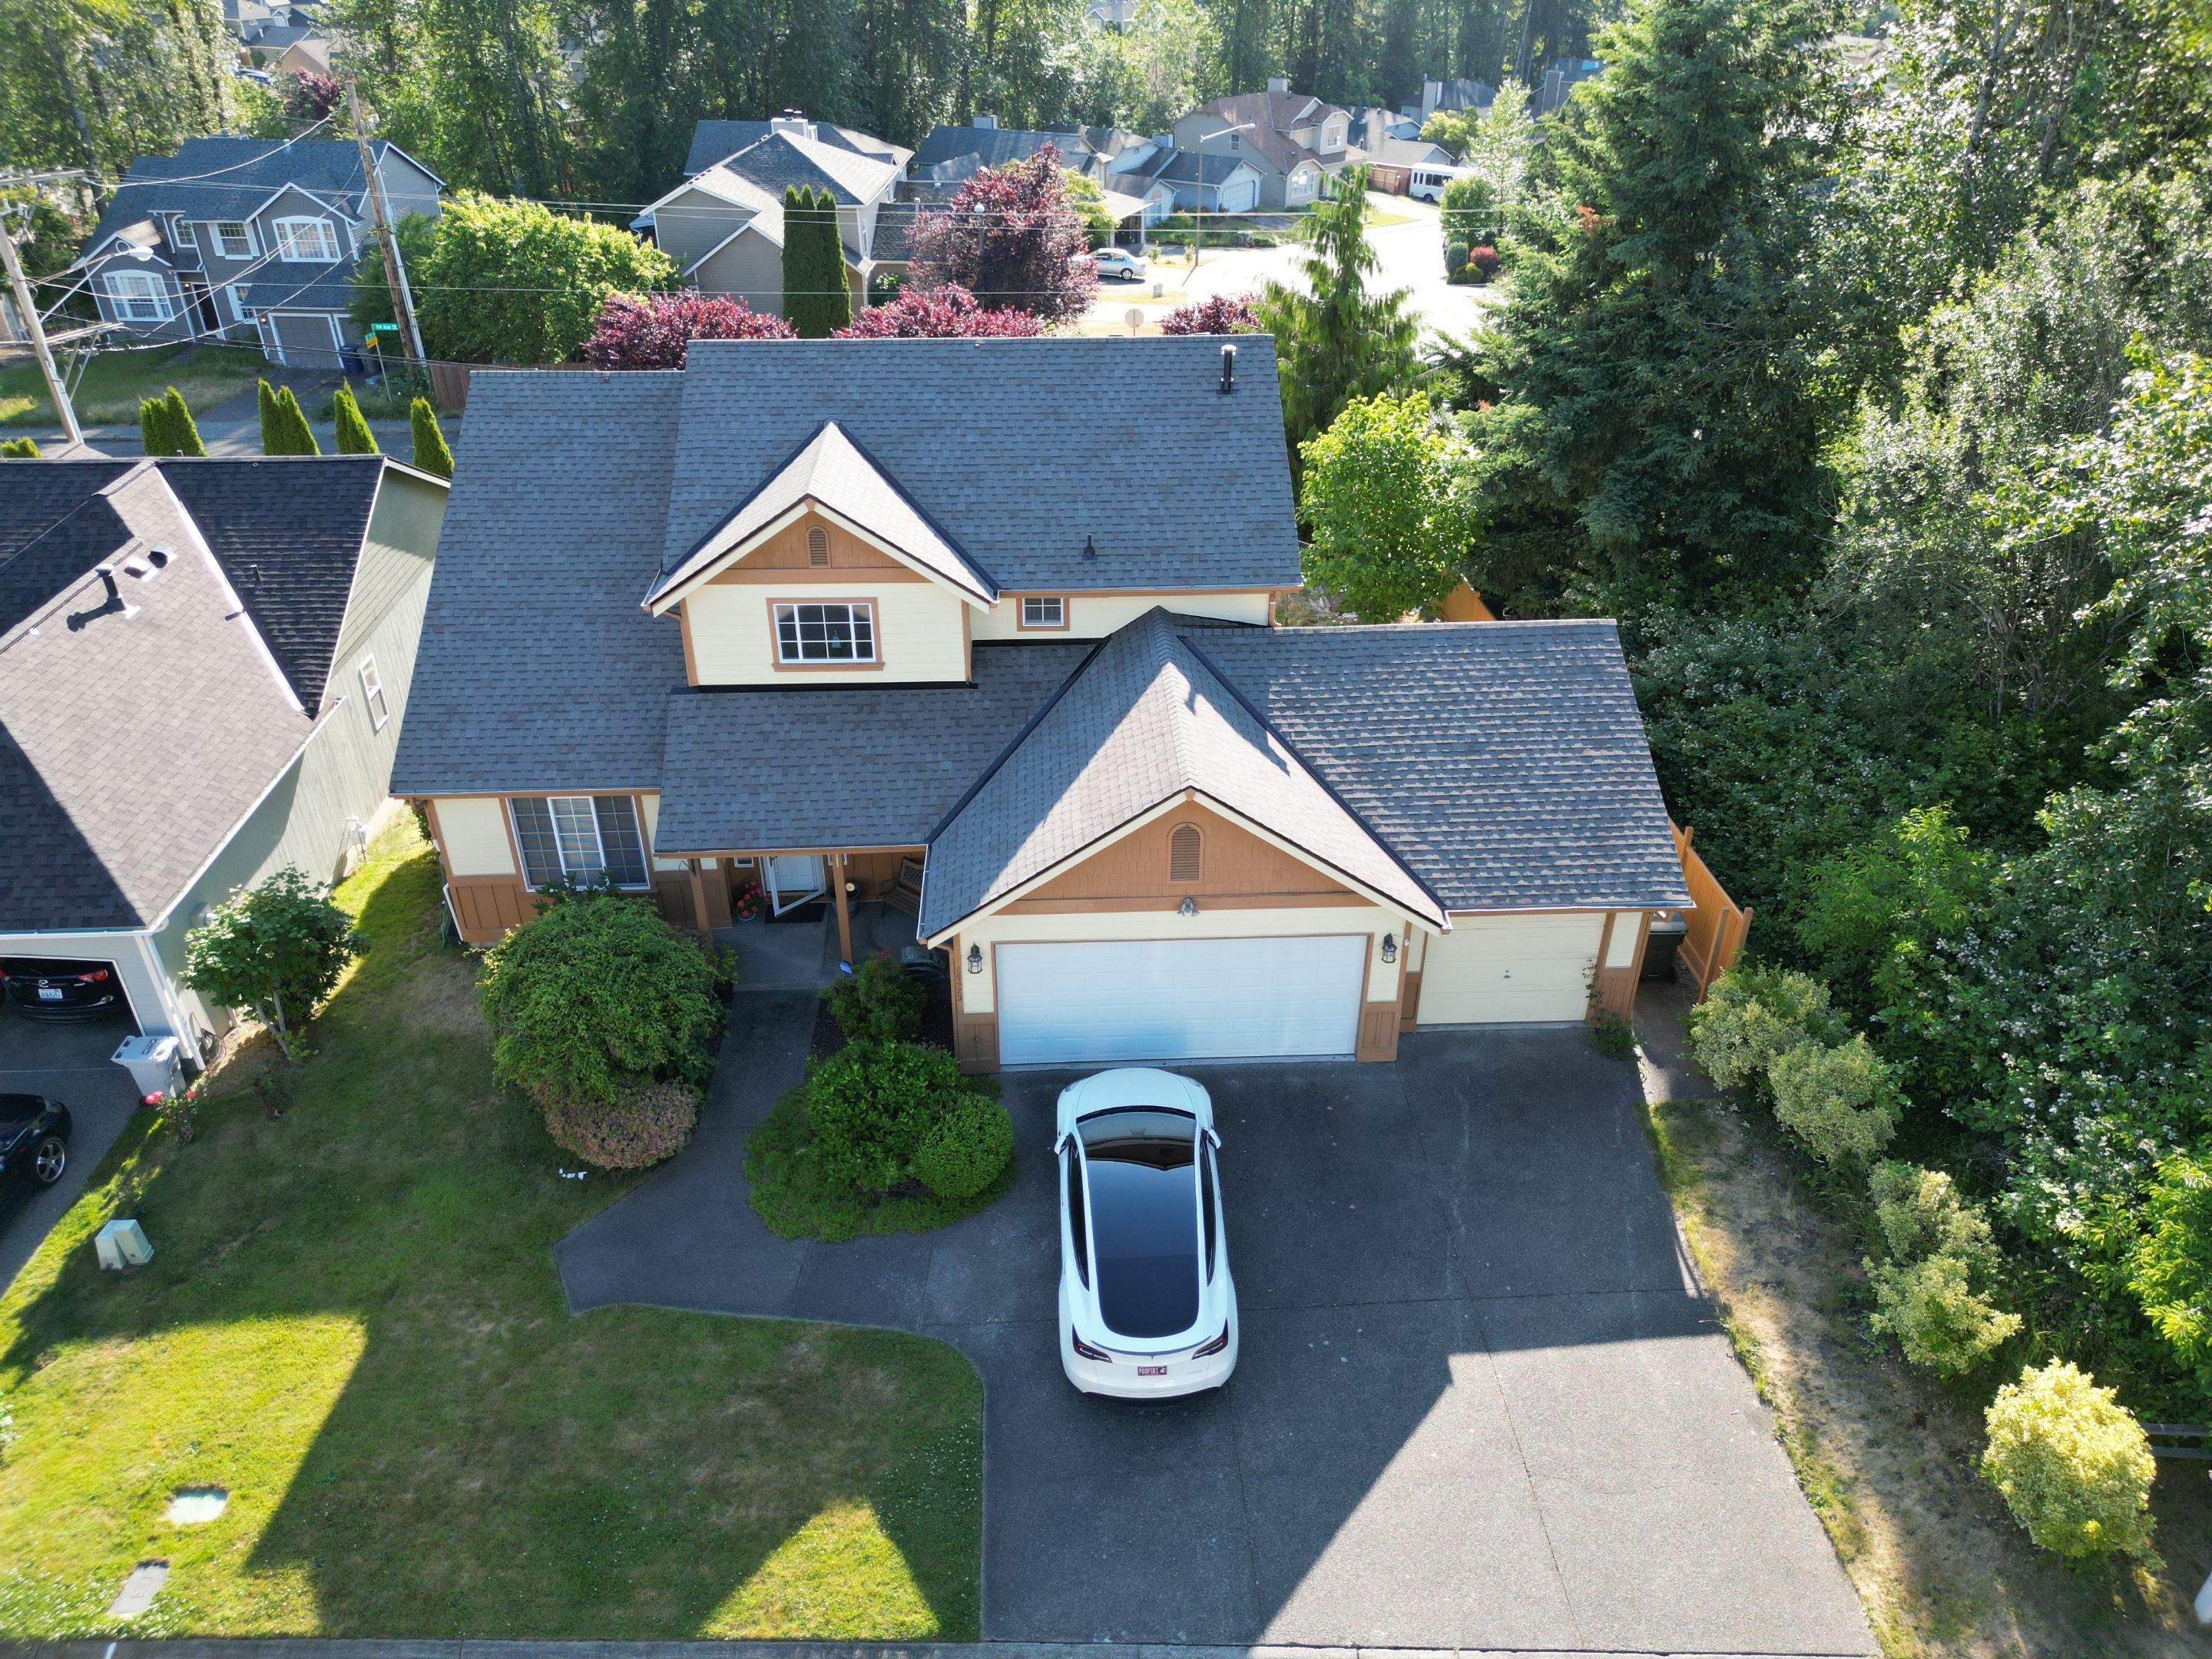 Second picture of new roof provided with roof financing in washington Asphalt Shingle Roofs